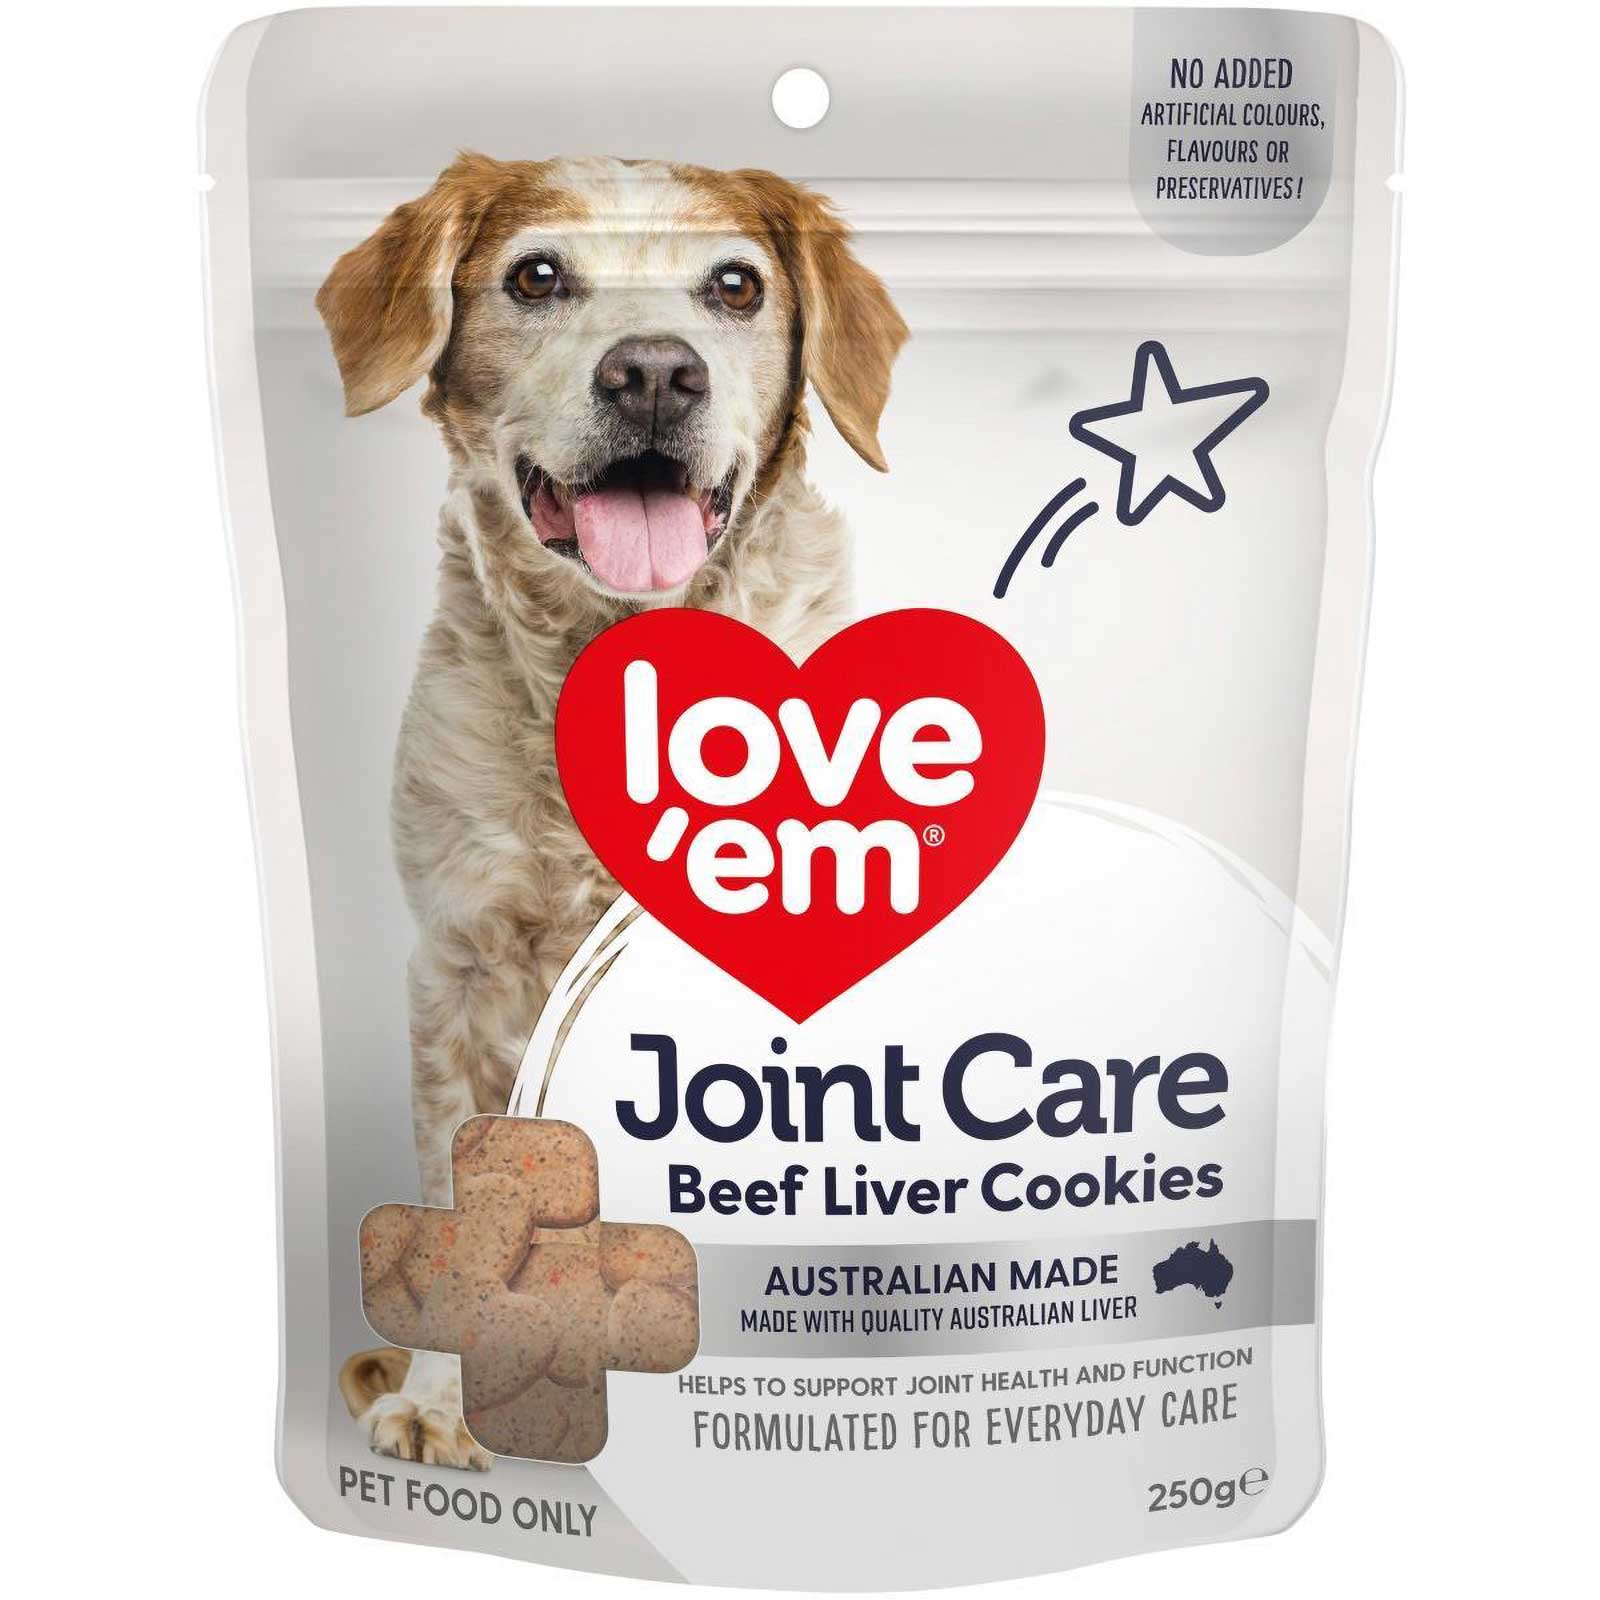 Love'em Joint Care Beef Liver Cookie Dog Treats